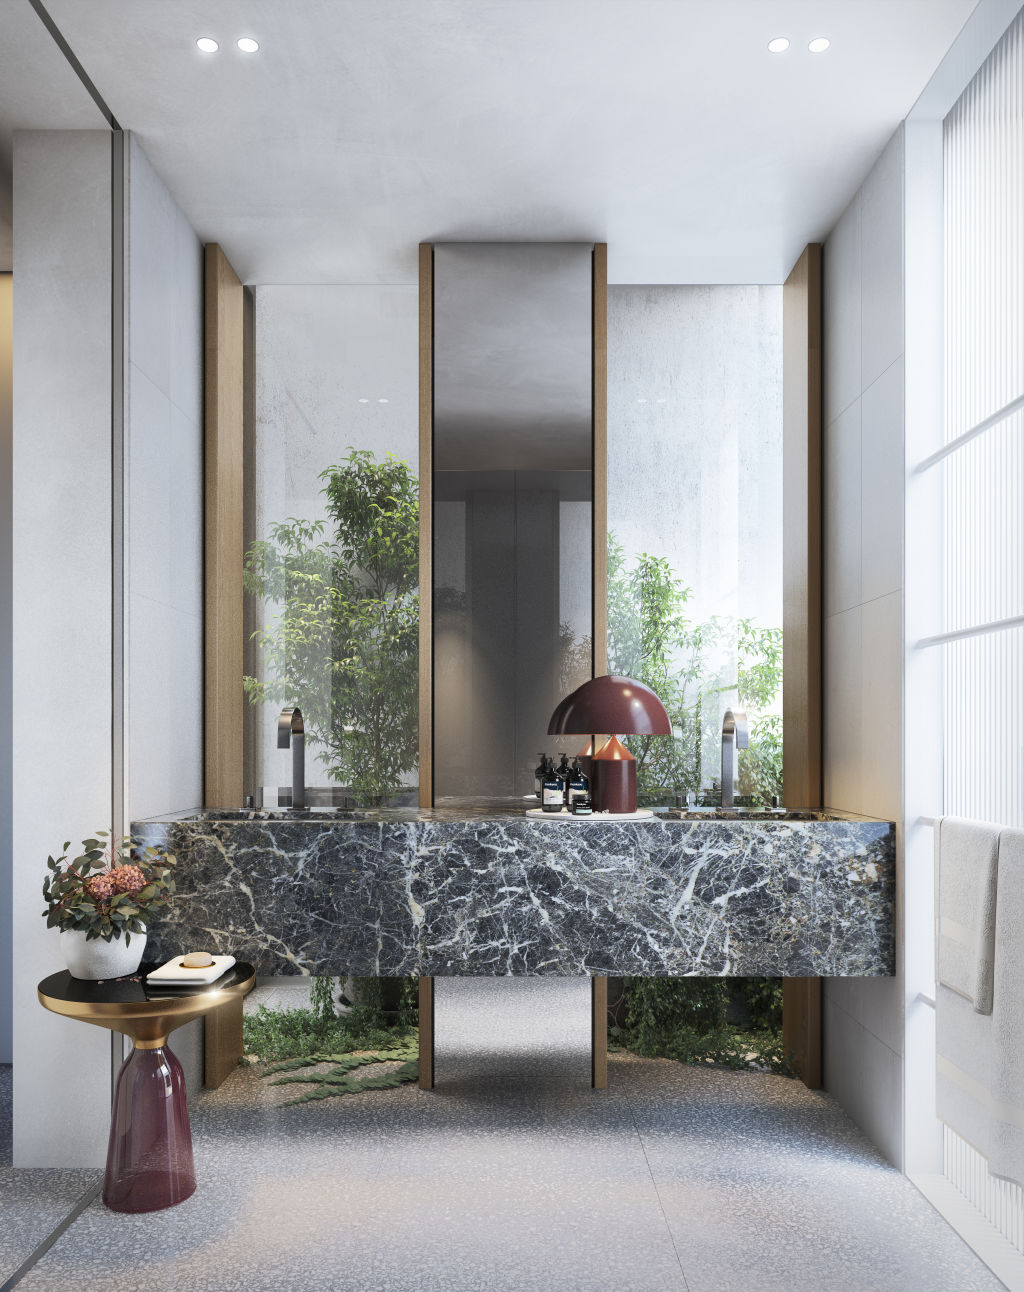 Terrazzo, marble and iron-bronze detailing feature in the interiors. Photo: Artist impression